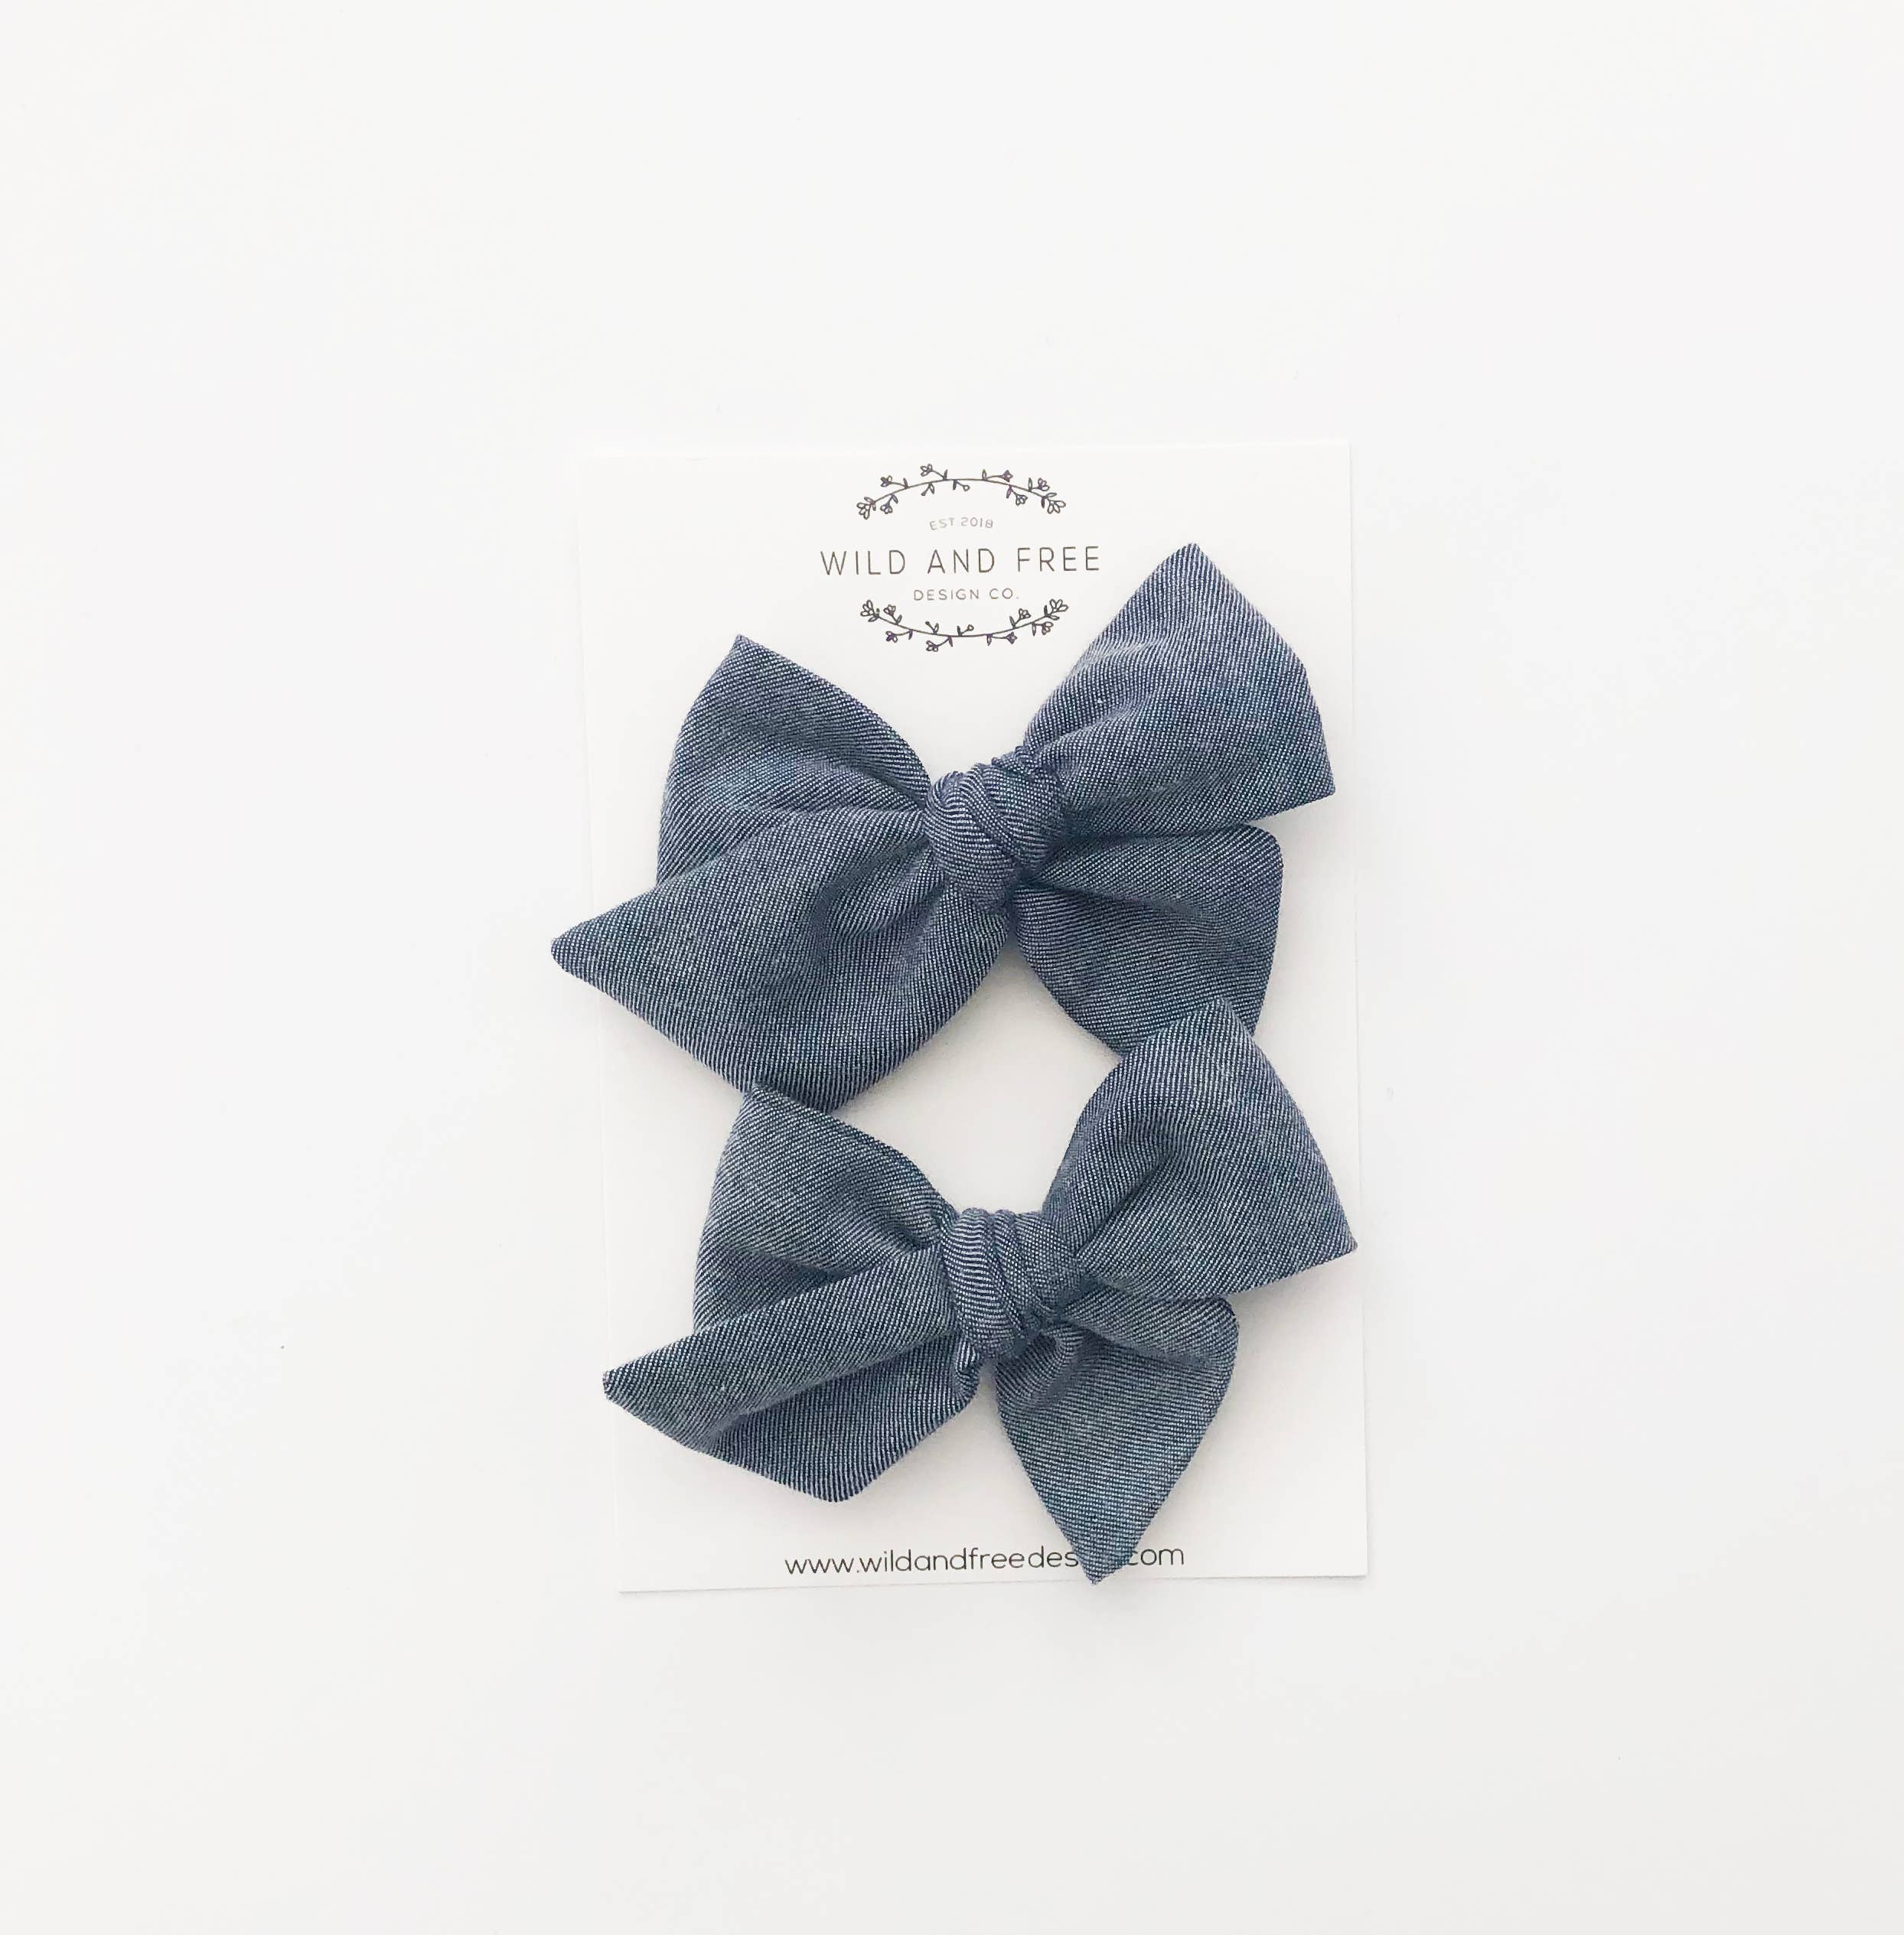 Wild and Free Pigtail Bow Sets